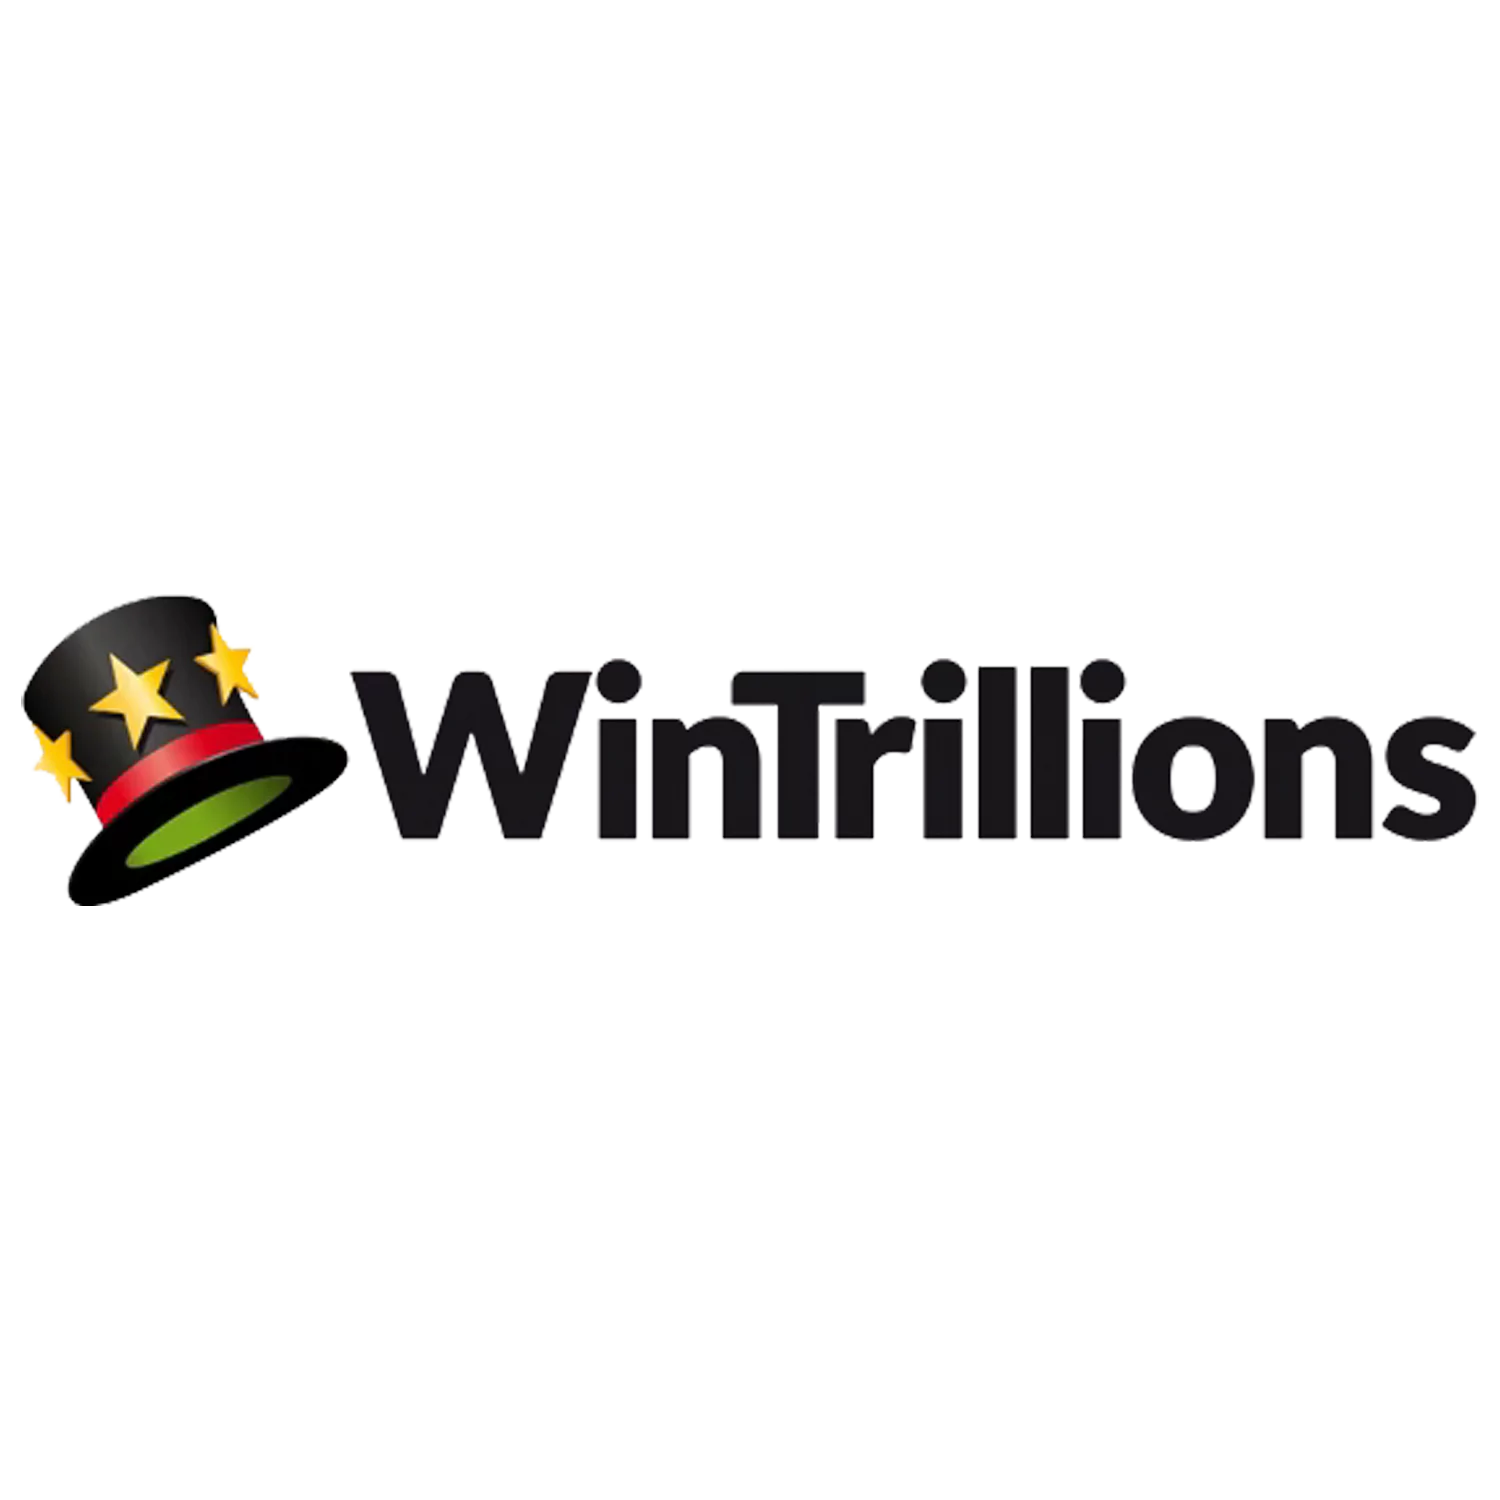 Learn how to buy tickets and withdraw winnings from the WinTrillions site and app.